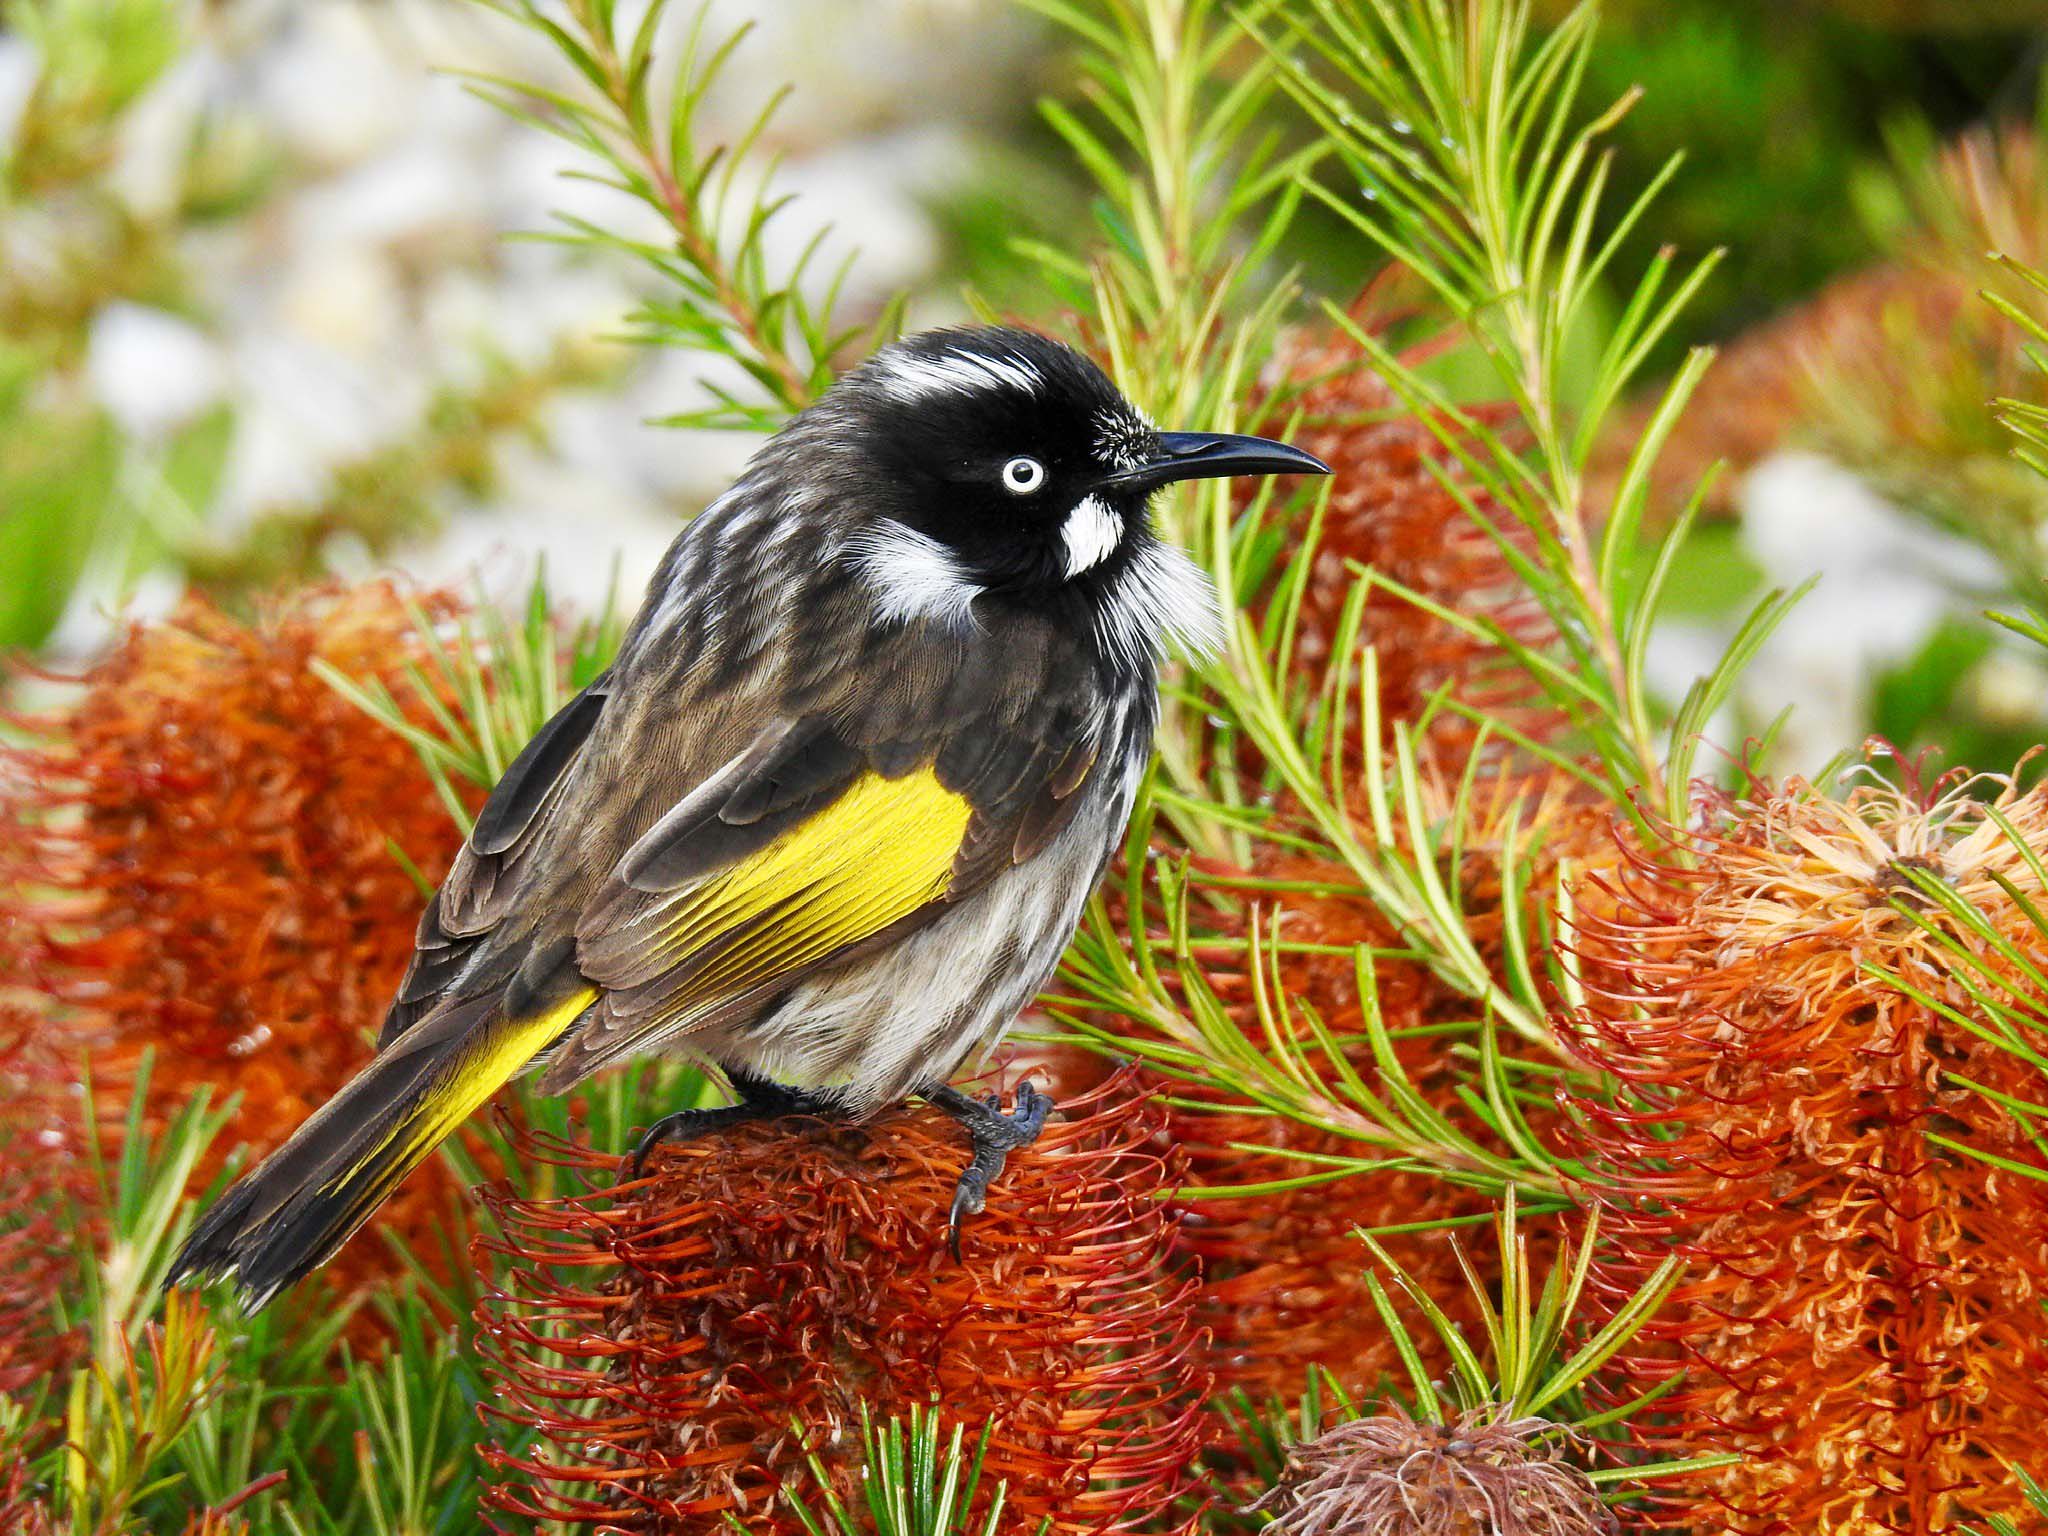 Close-up of a small brown and yellow bird with a black face and beak and bright white eye, resting on red flowers